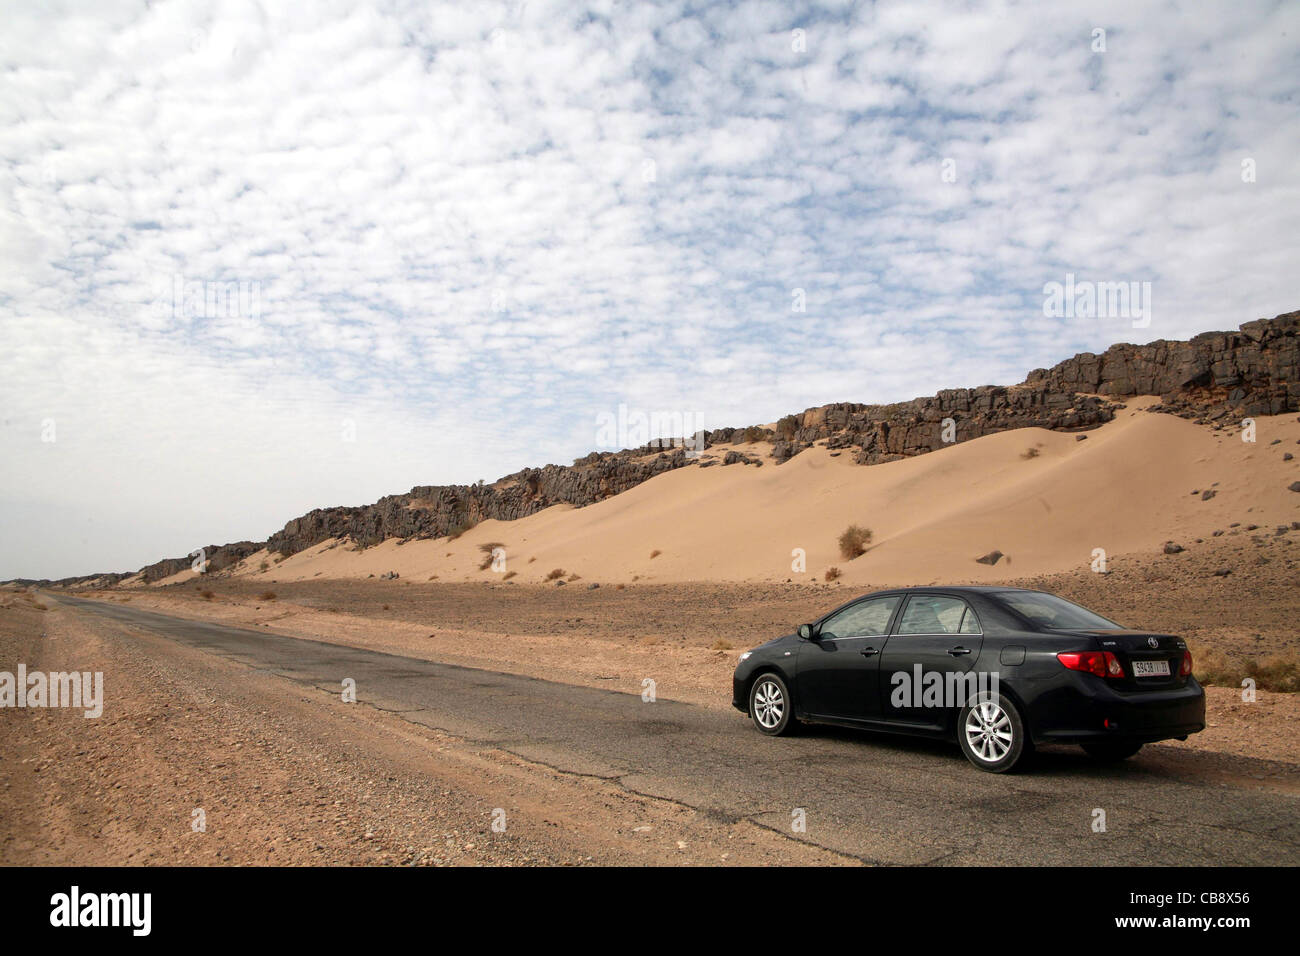 A rent-a-car on the road between Tata and Guelimim in Western Sahara region of Morocco Stock Photo